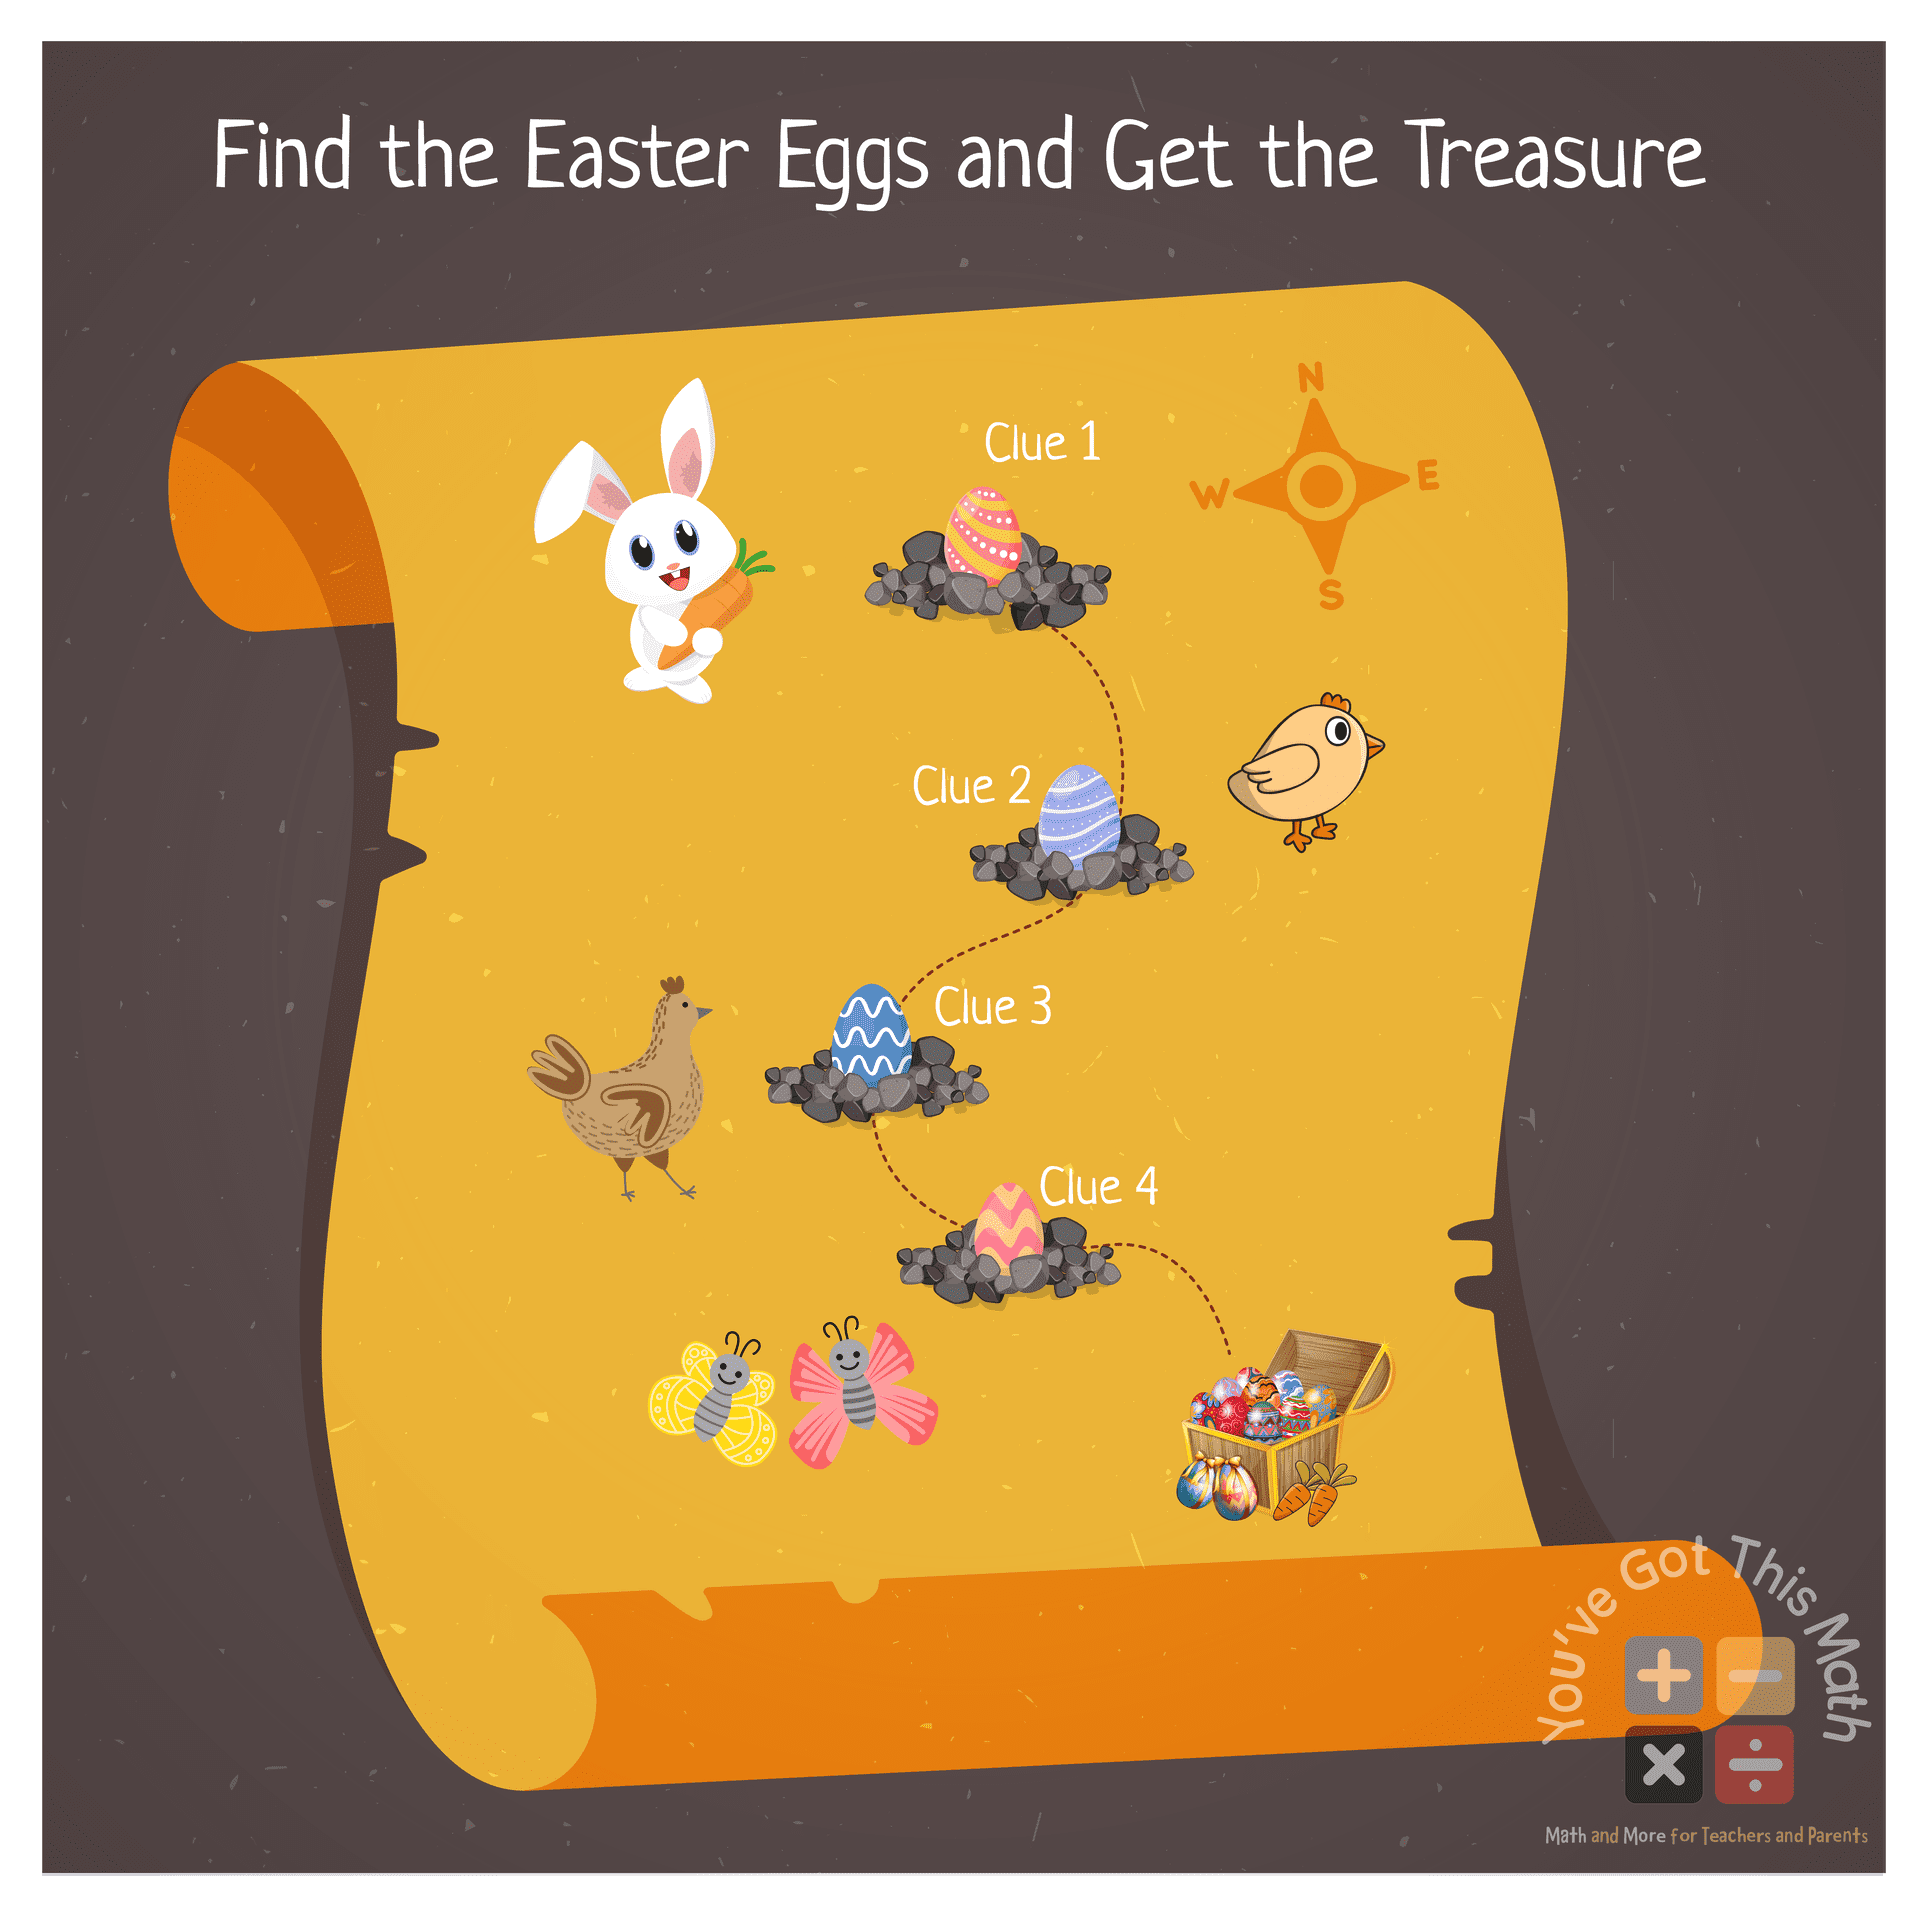 Find the Easter Eggs and Get the Treasure